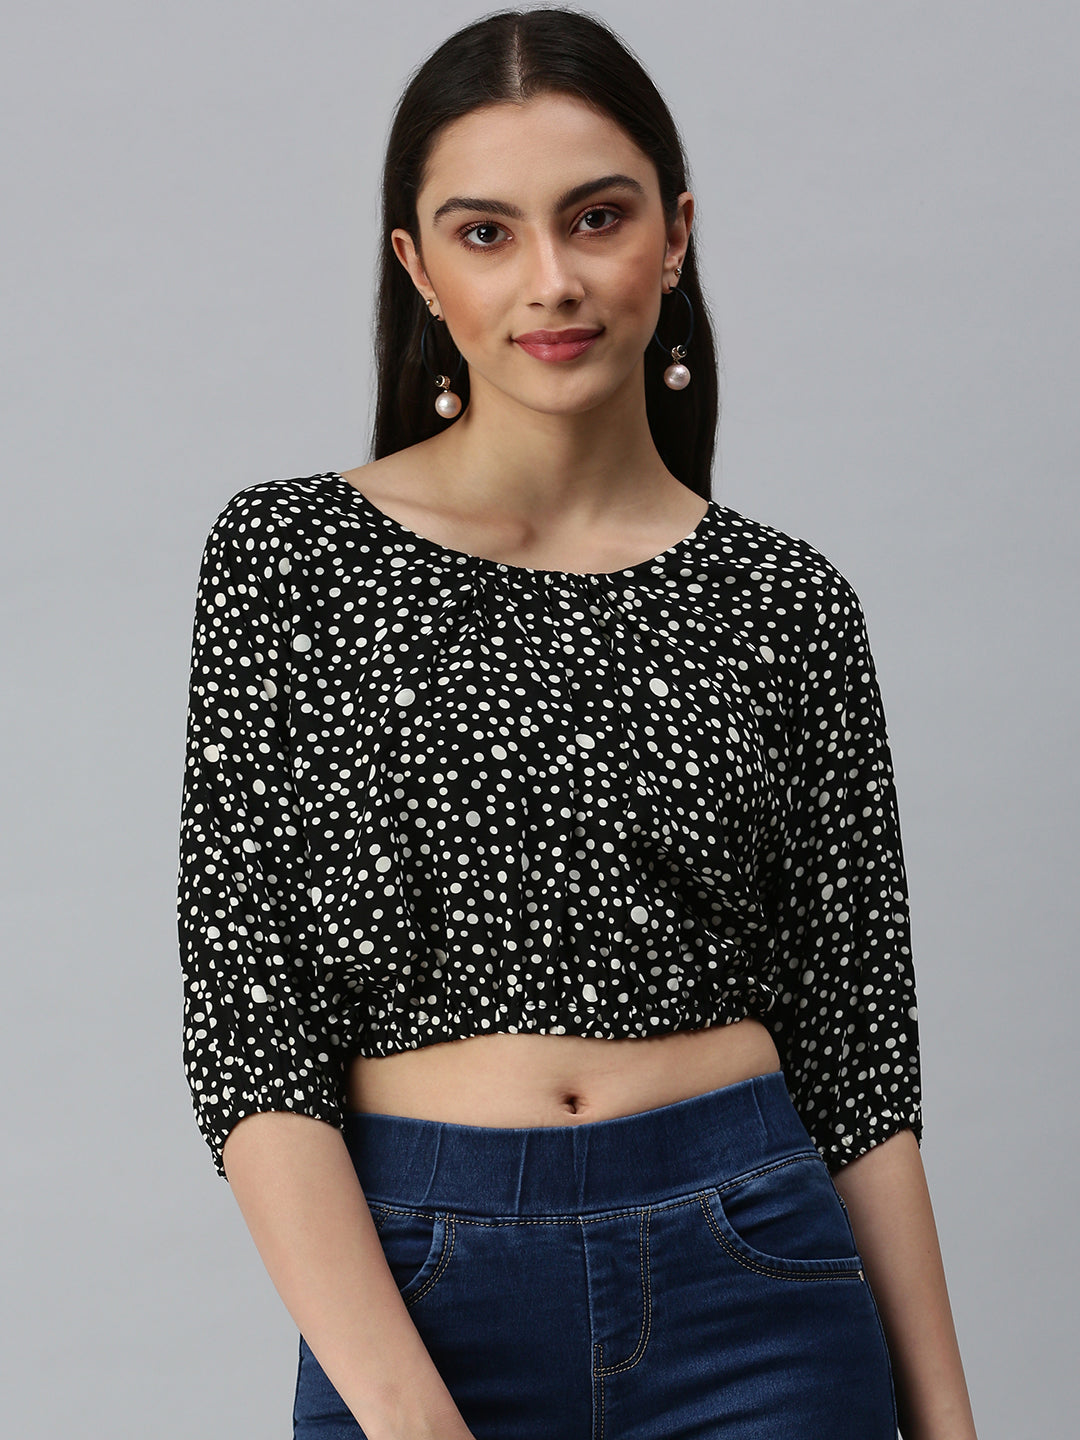 Women's Embroidered Black Top